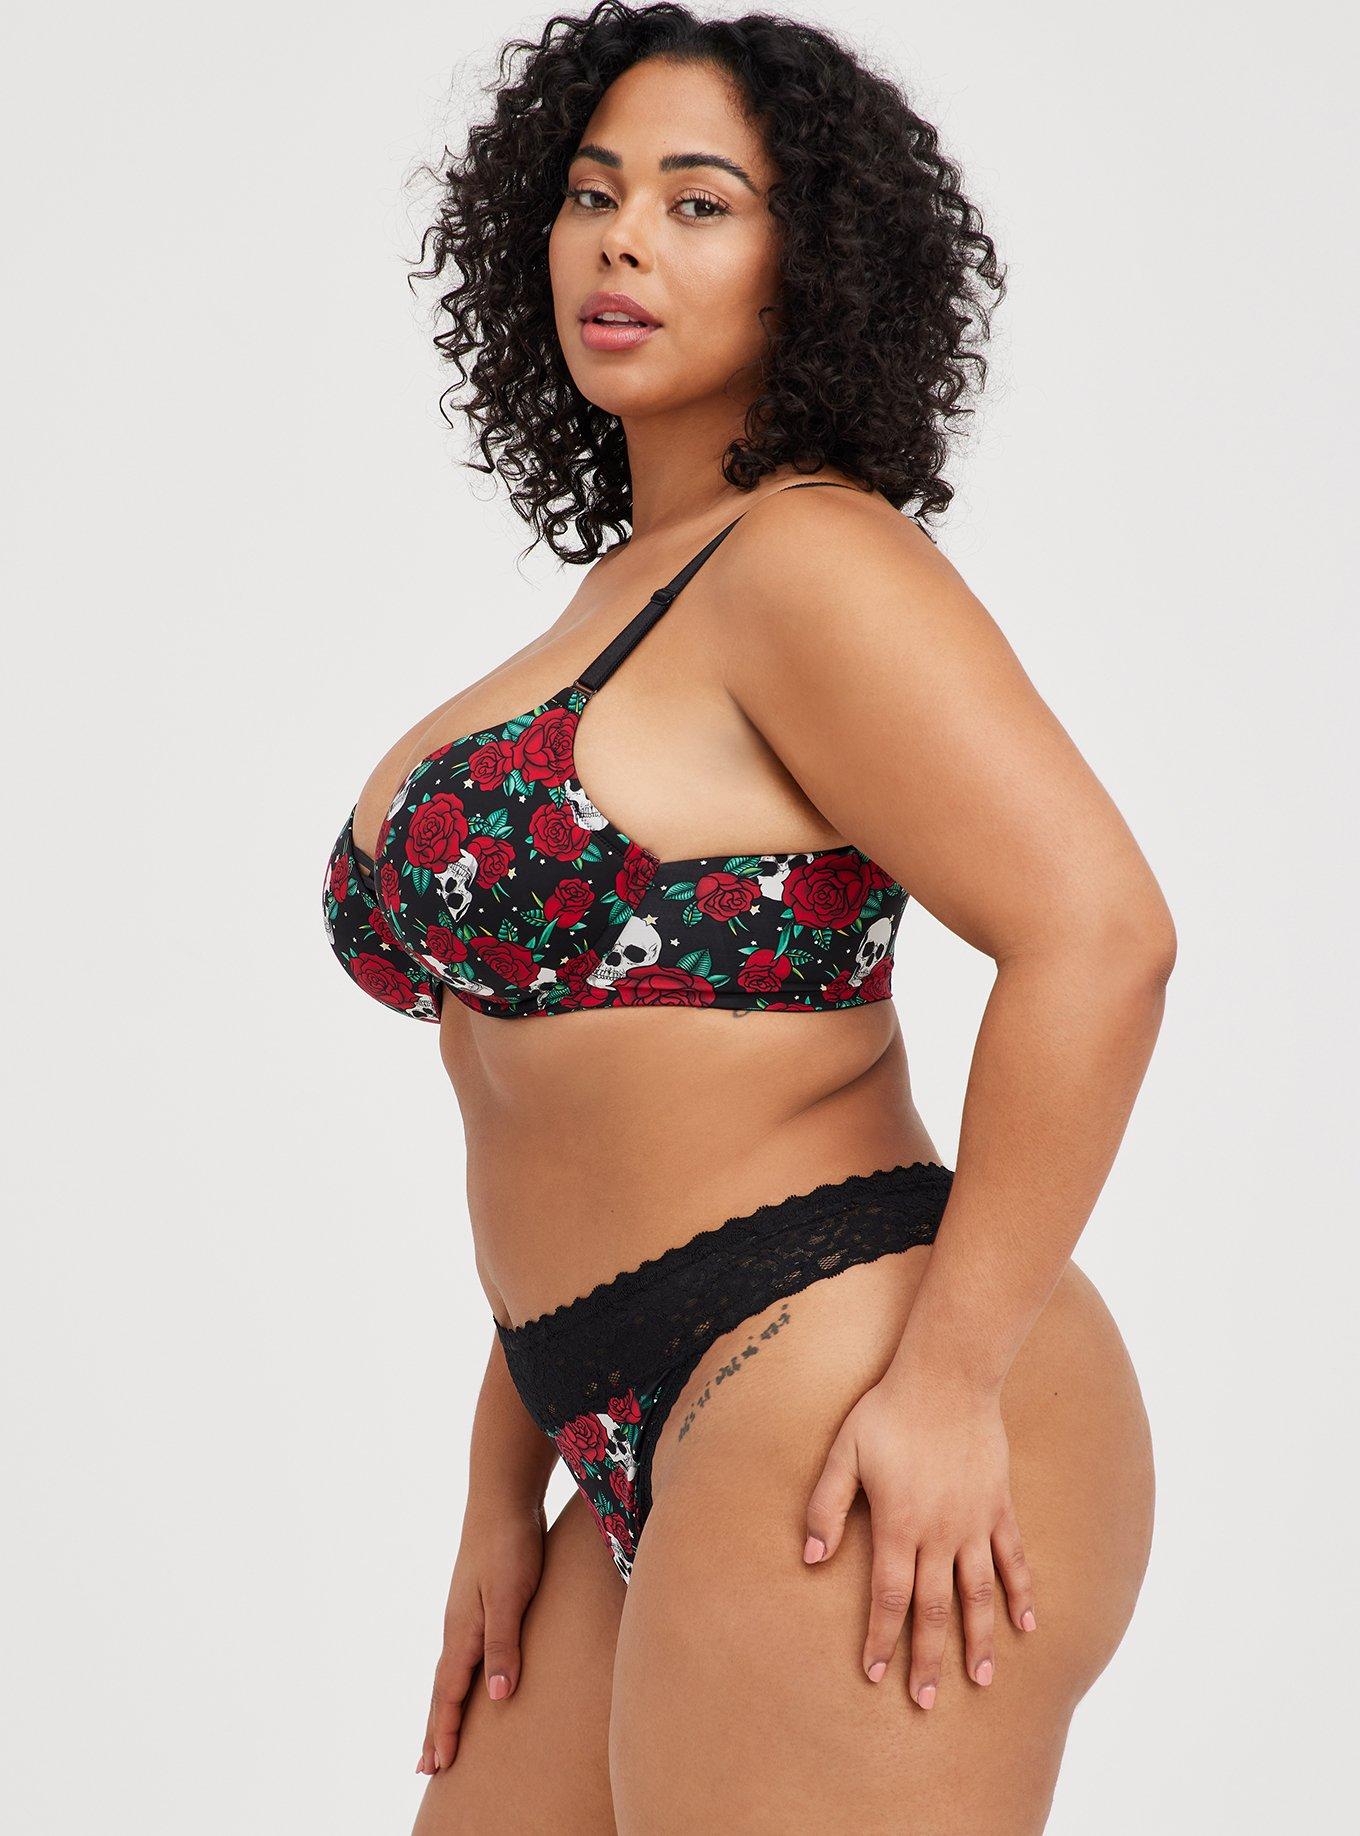 Plus Size - Second Skin Mid-Rise G String Lace Trim Panty - Torrid